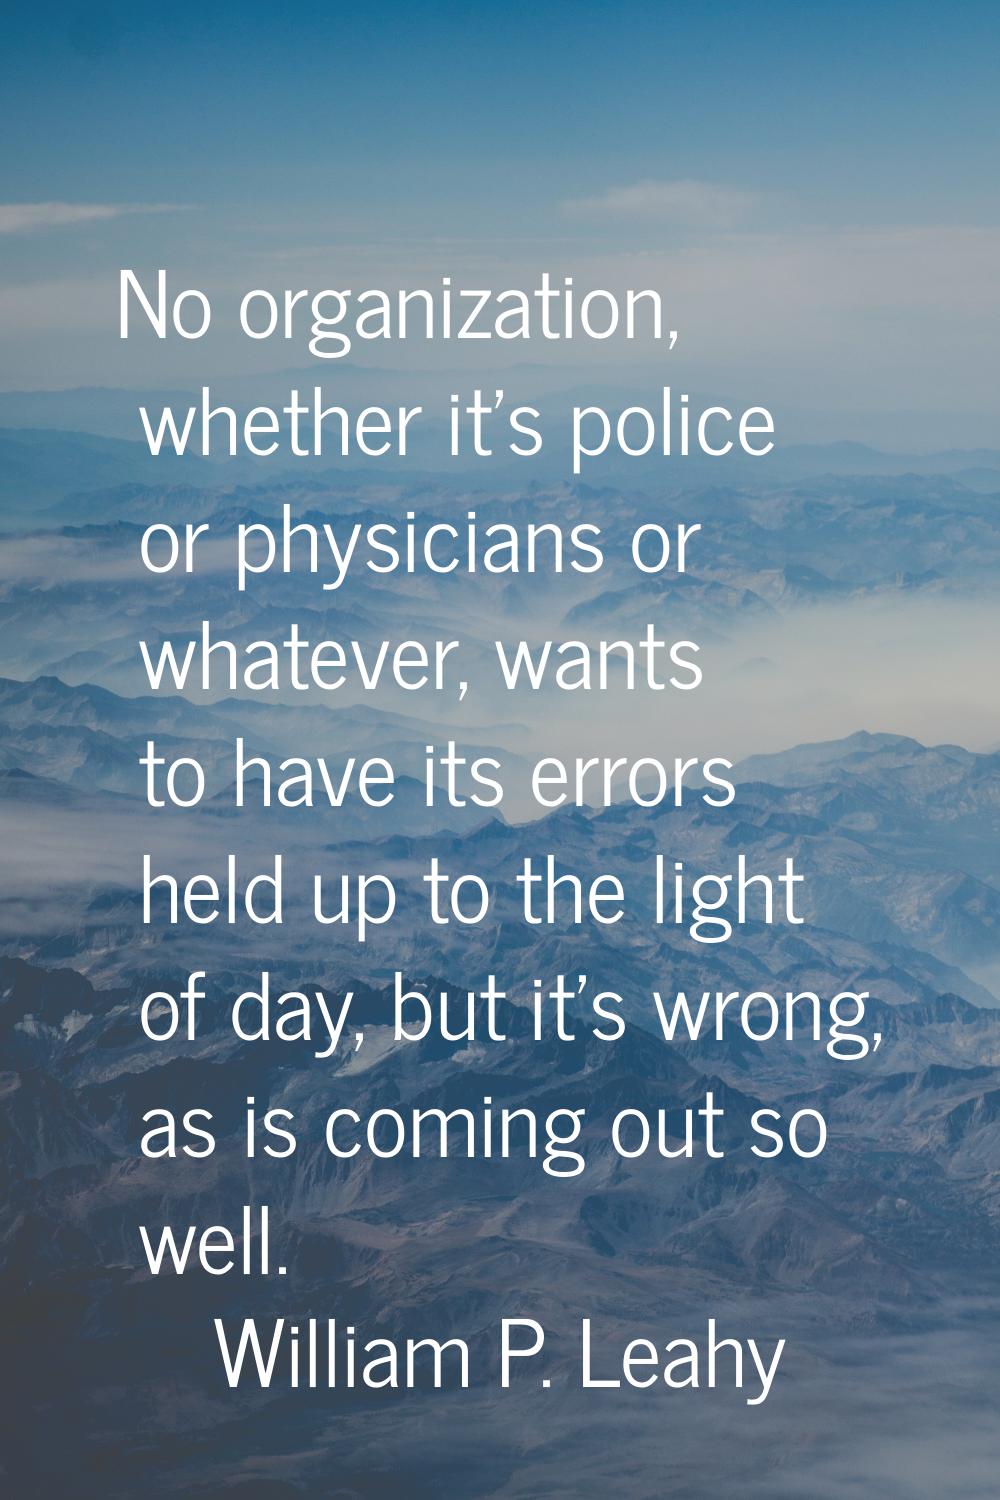 No organization, whether it's police or physicians or whatever, wants to have its errors held up to